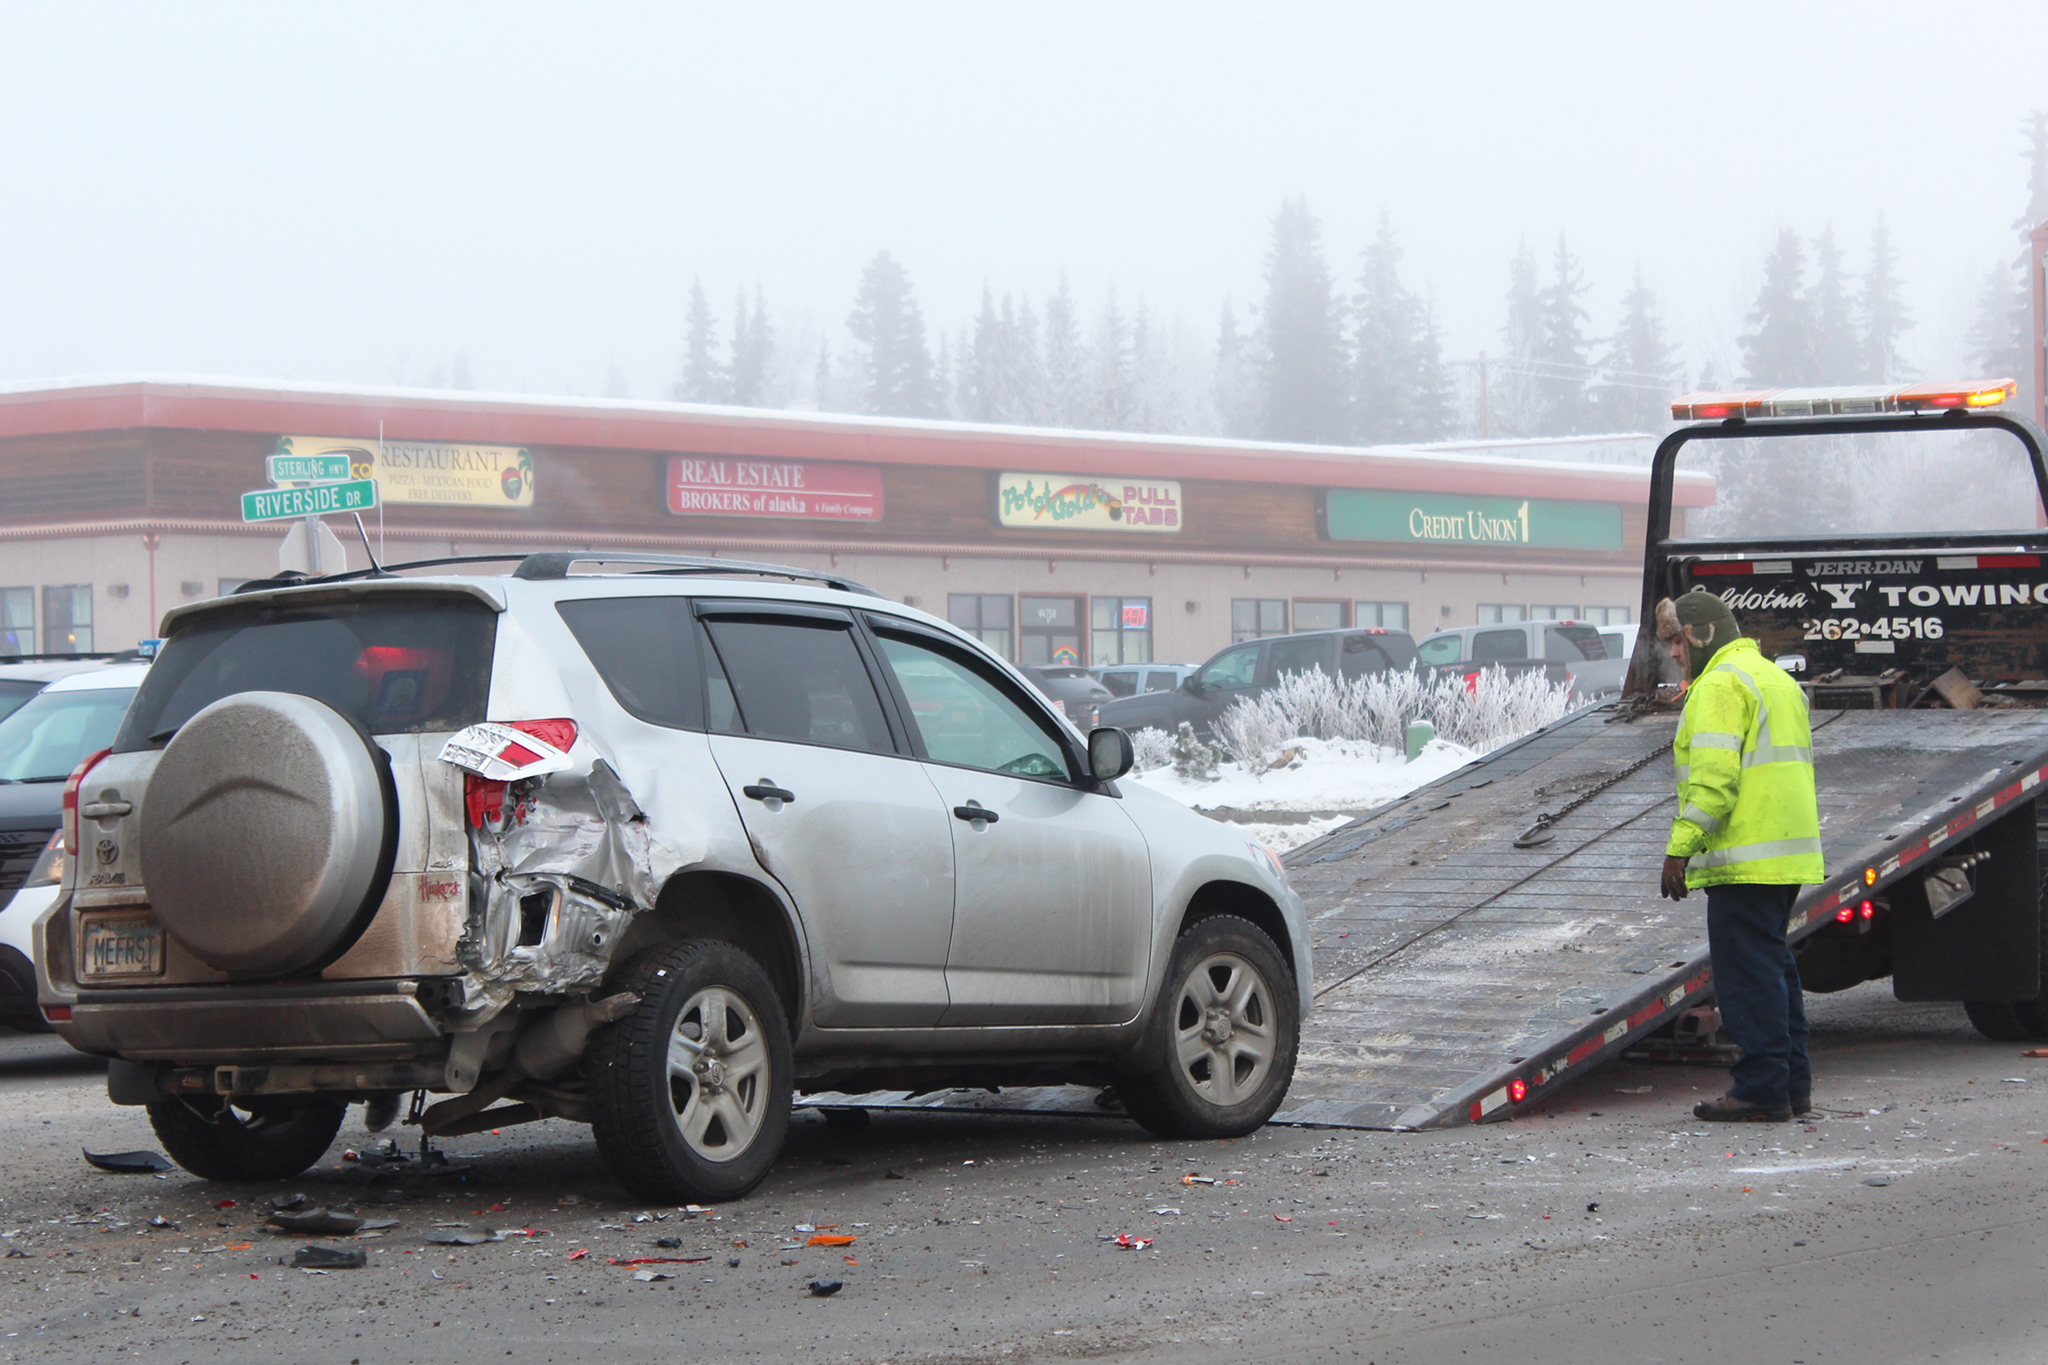 Members of Soldotna Y Towing Inc. prepare a vehicle to be taken away from the scene of a four-vehicle accident on Wednesday, Jan. 11, 2017 on the David Douthit Veterans Memorial Bridge in Soldotna, Alaska. One person was taken to the hospital with non-life threatening injuries. (Megan Pacer/Peninsula Clarion)